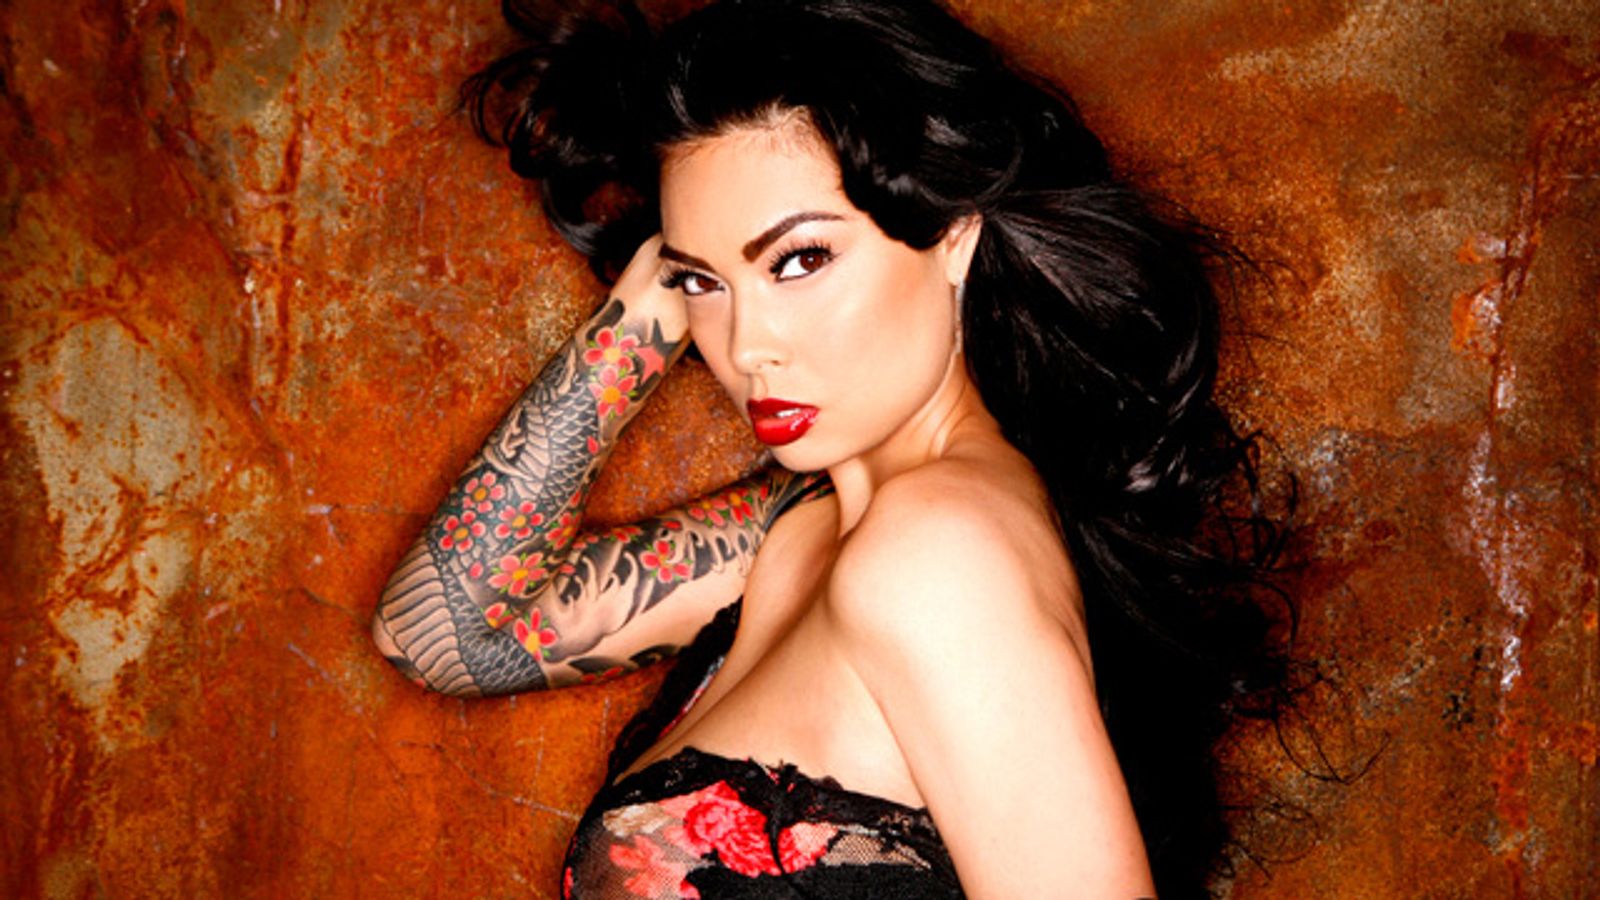 Tera Patrick to Host Internext After-Party